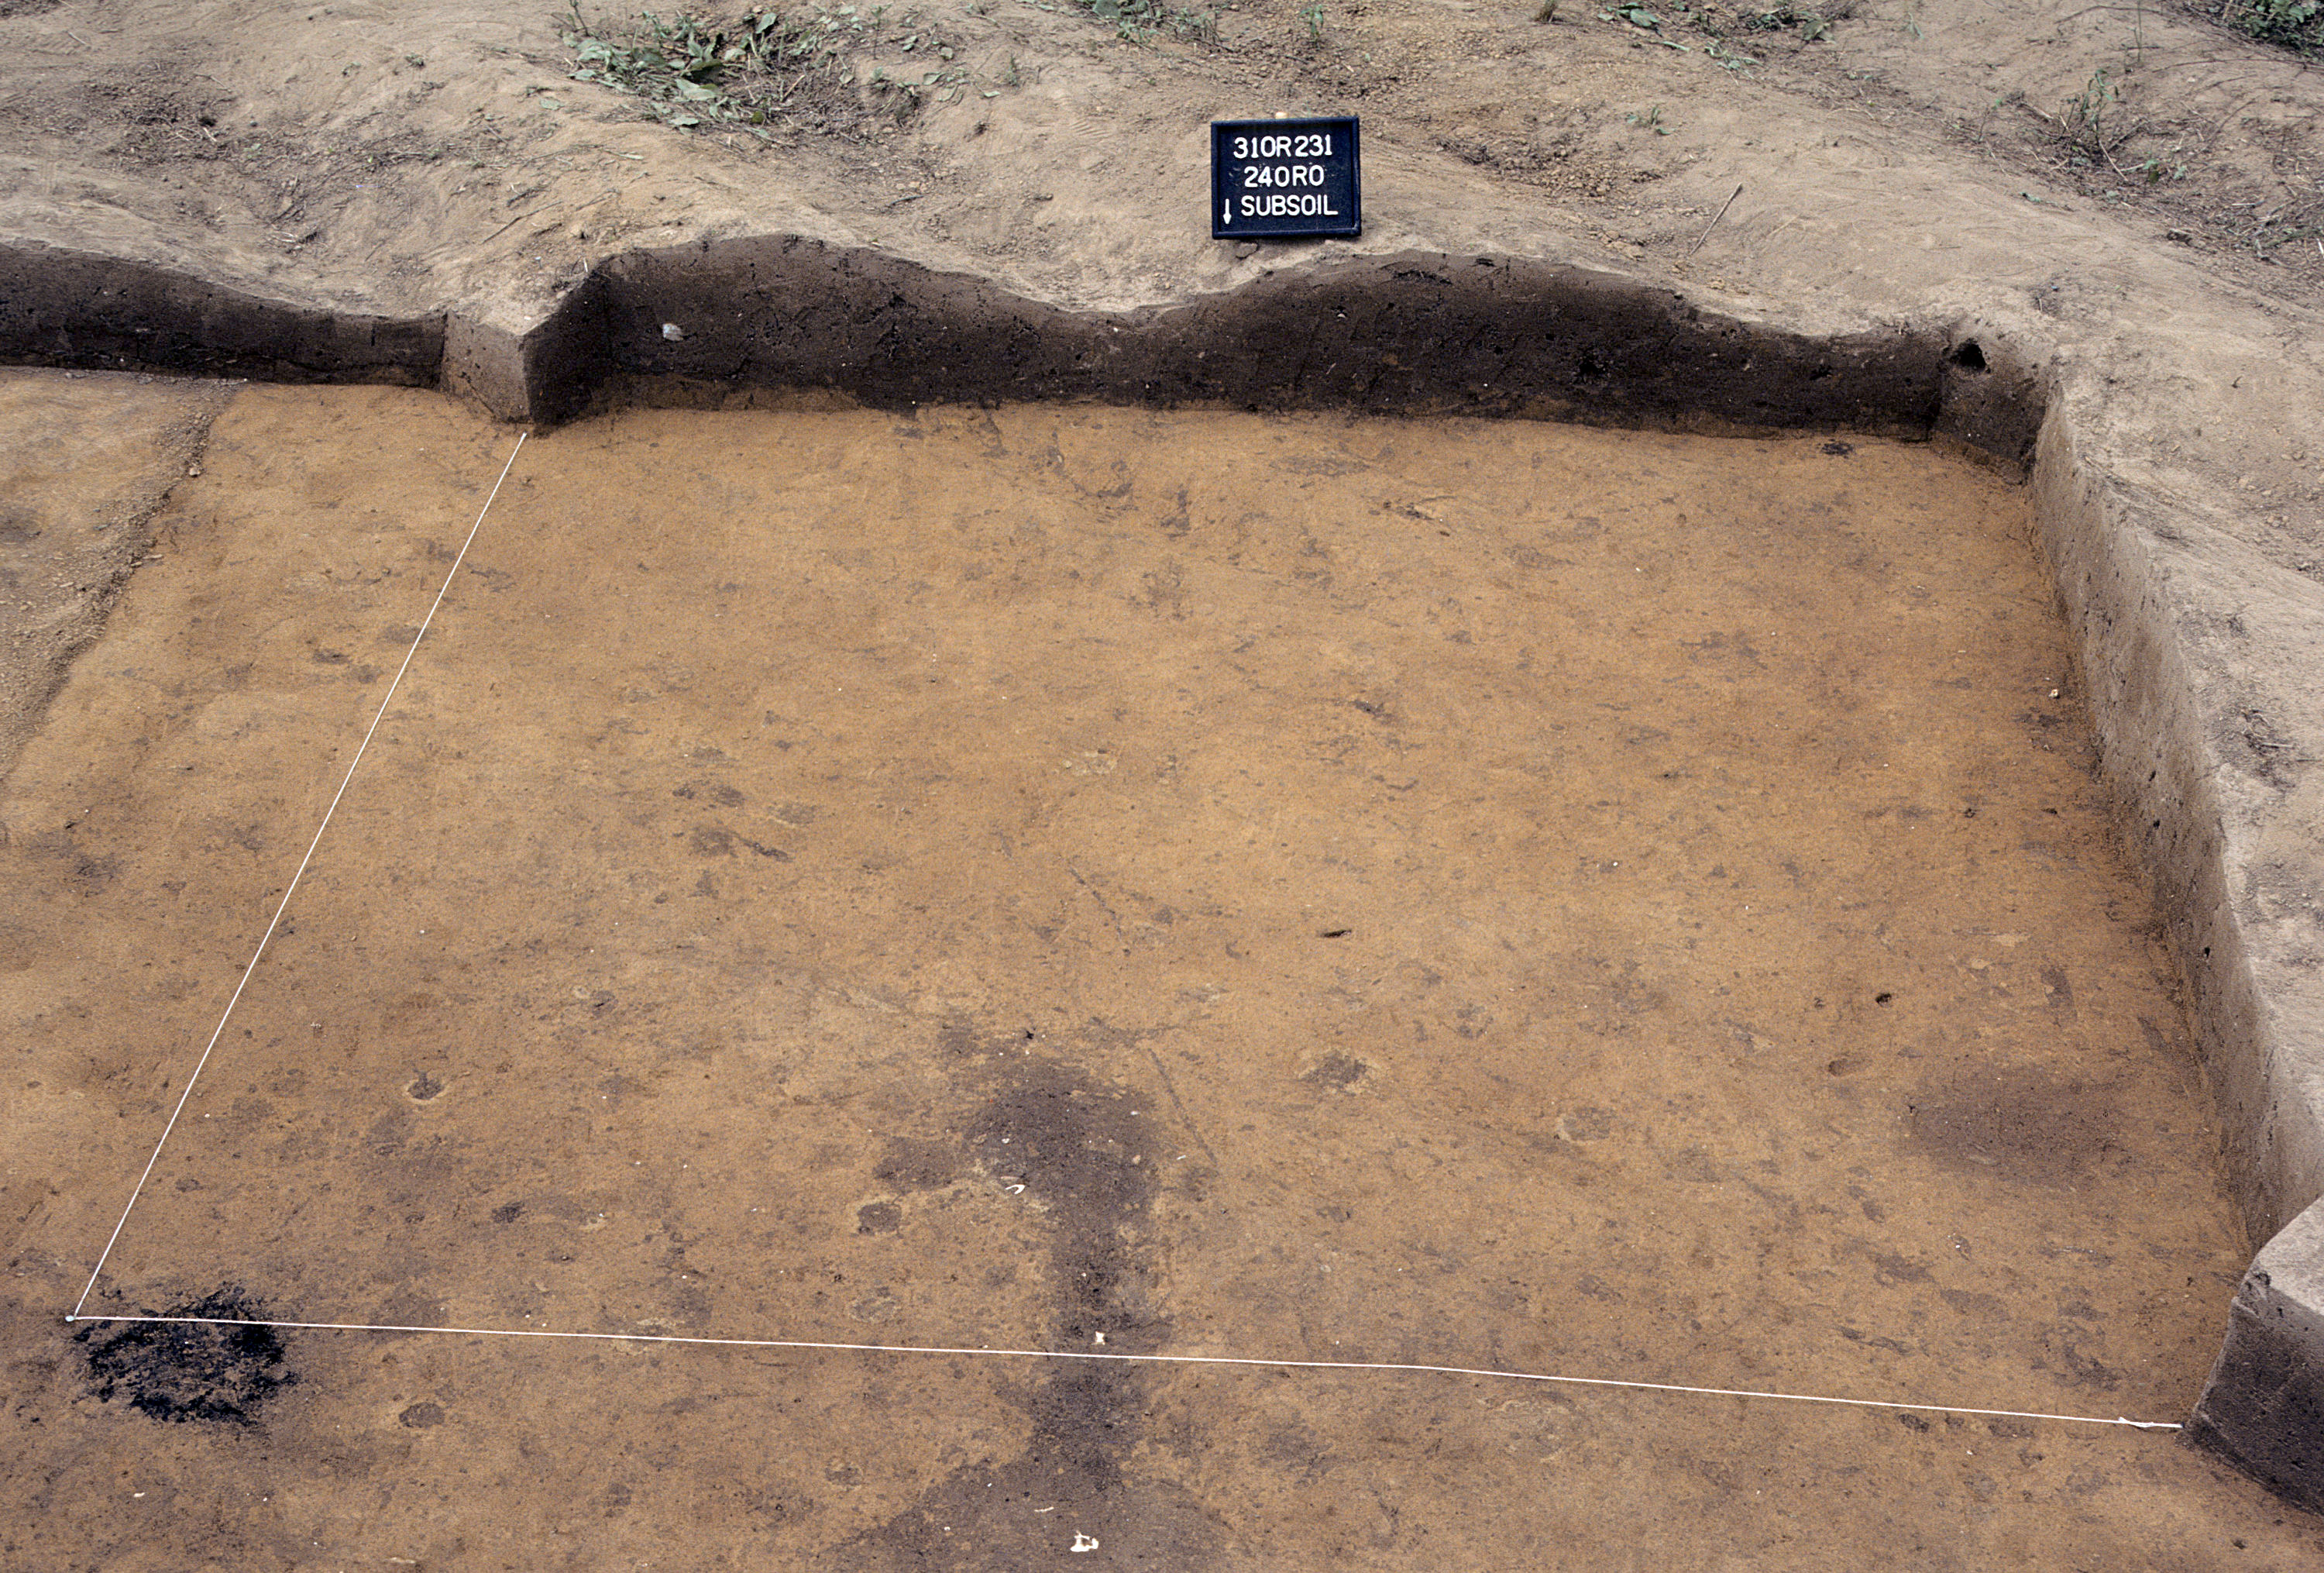 Figure 843. Sq. 240R0 at top of subsoil (view to south).